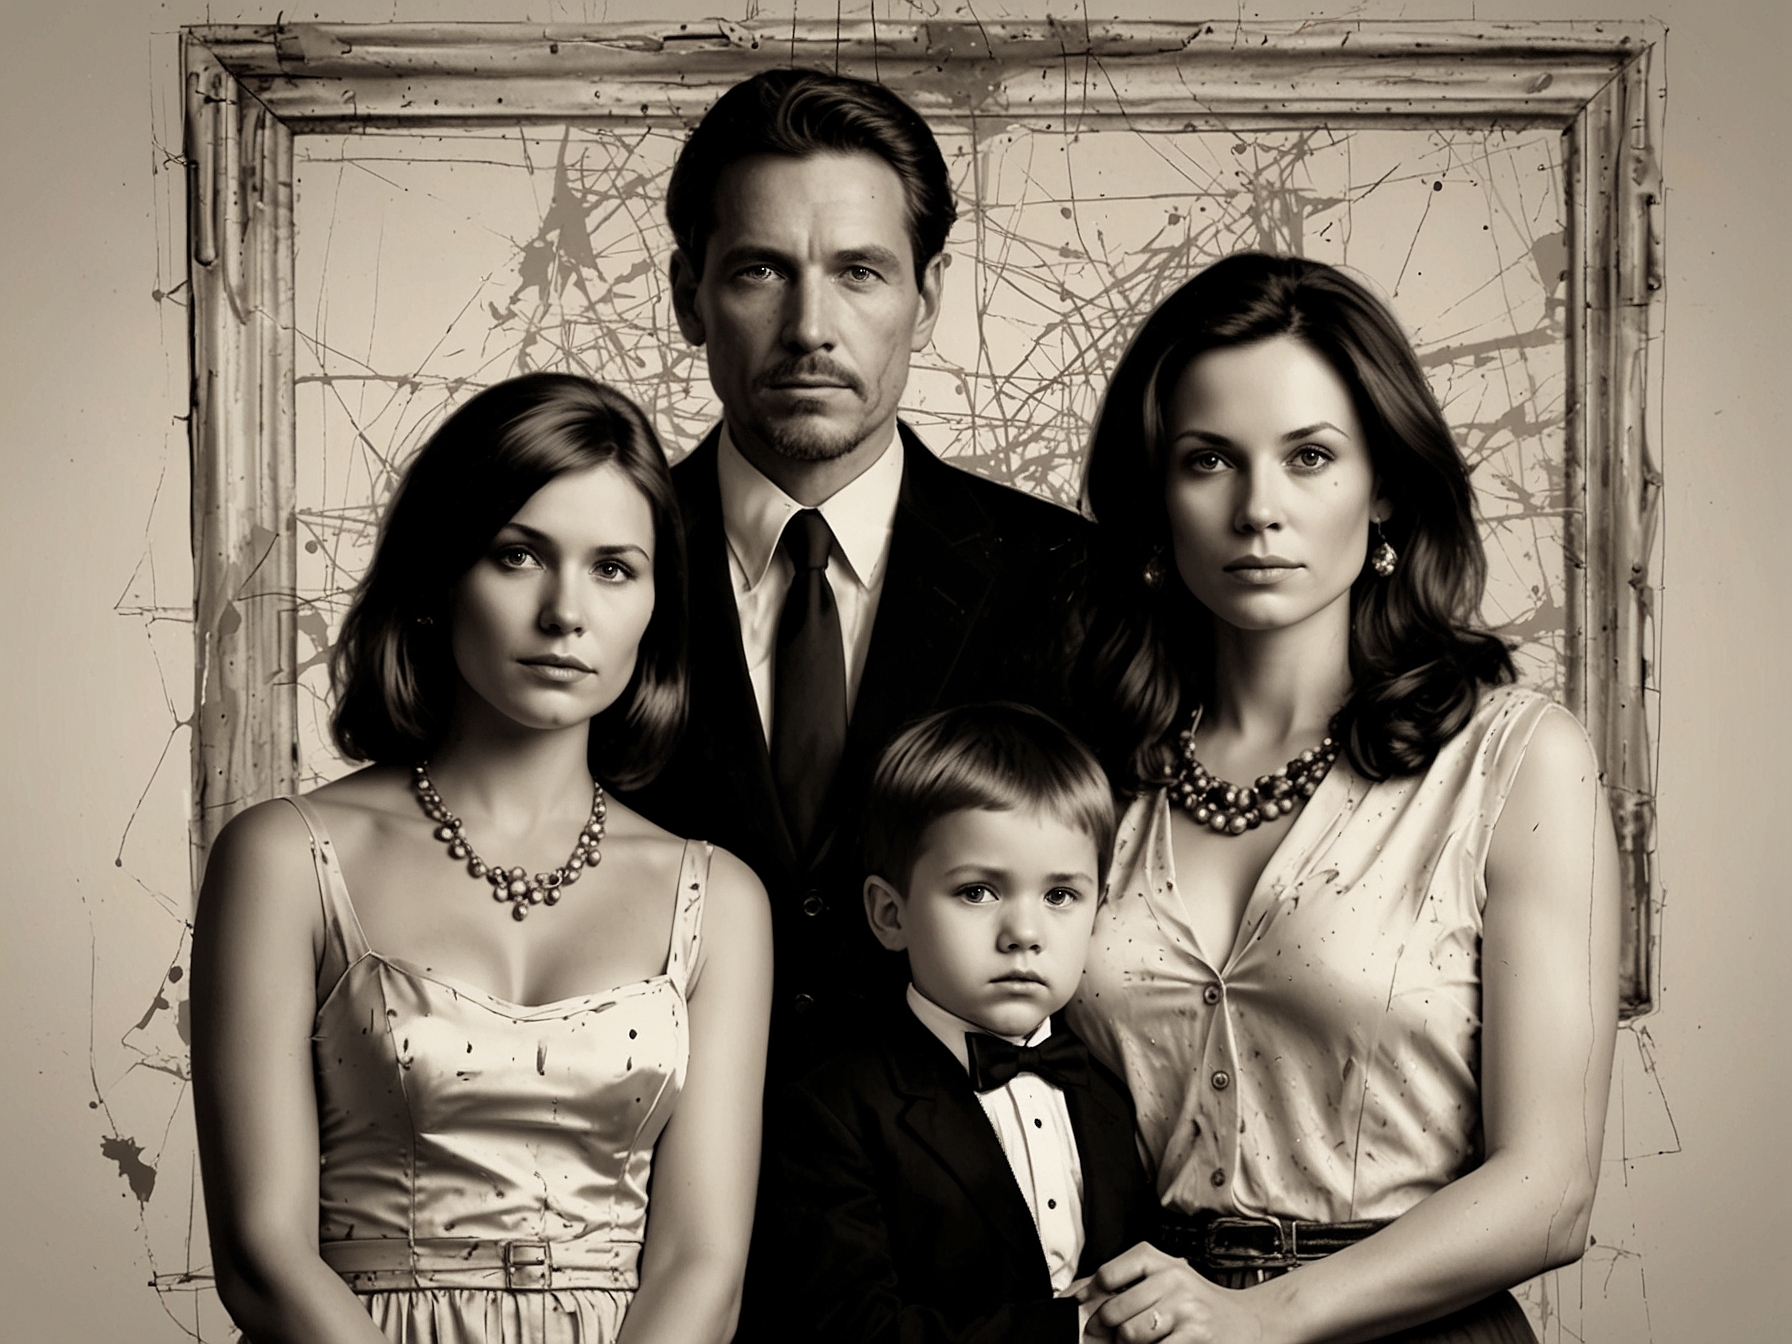 A family portrait with a cracked frame, highlighting the tension and potential disruption caused by the man's affair and the pressure from his mistress.